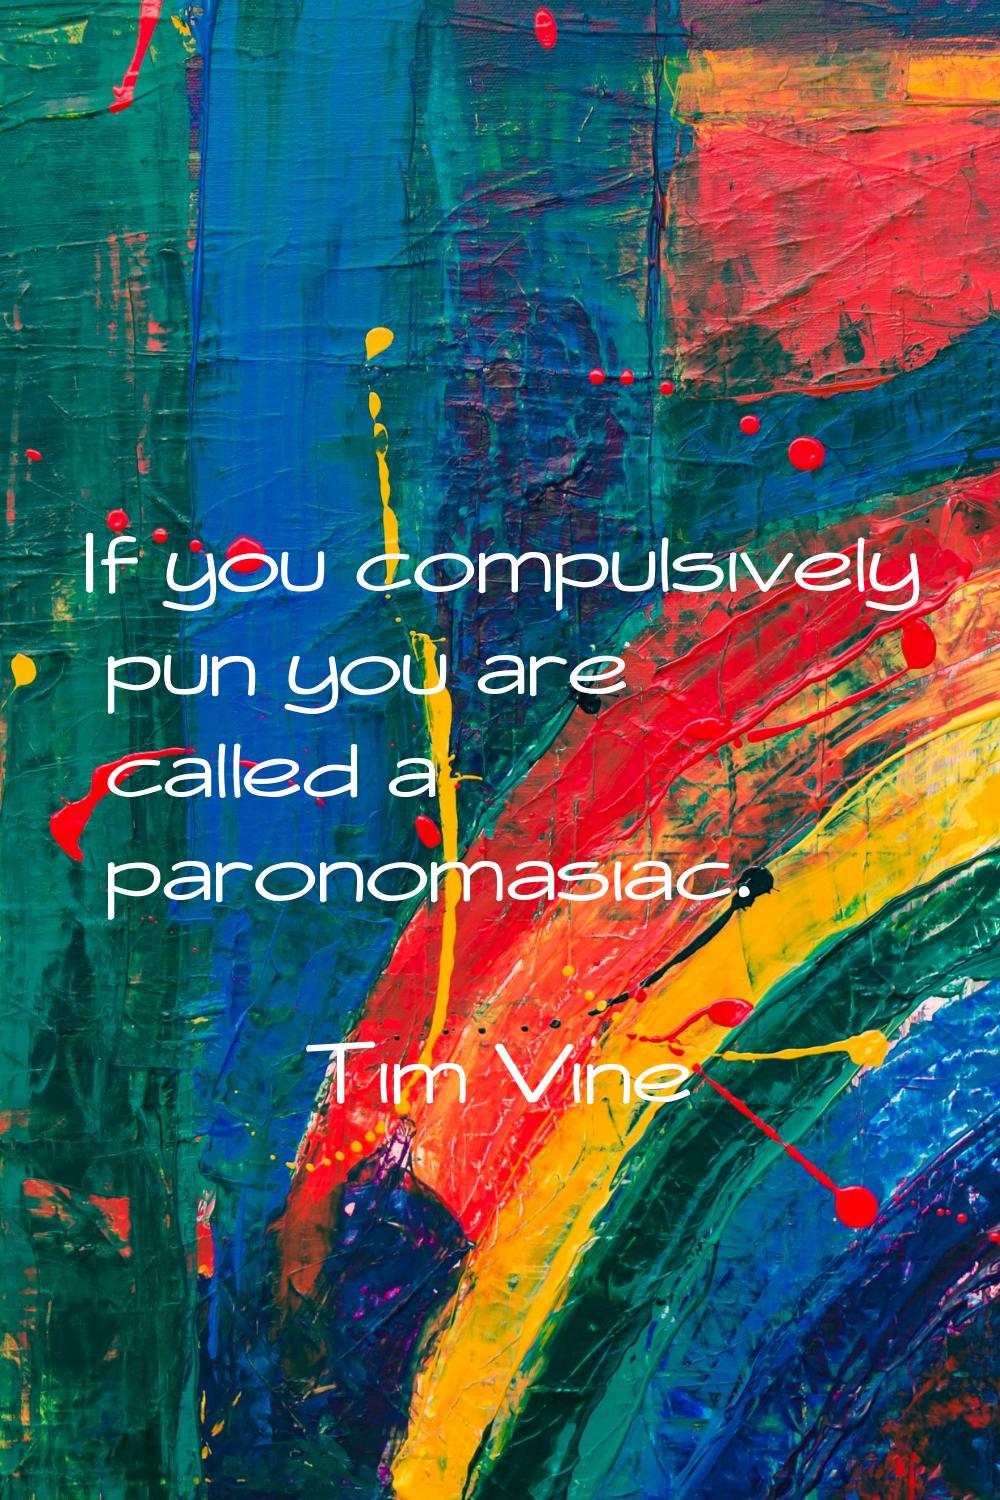 If you compulsively pun you are called a paronomasiac.